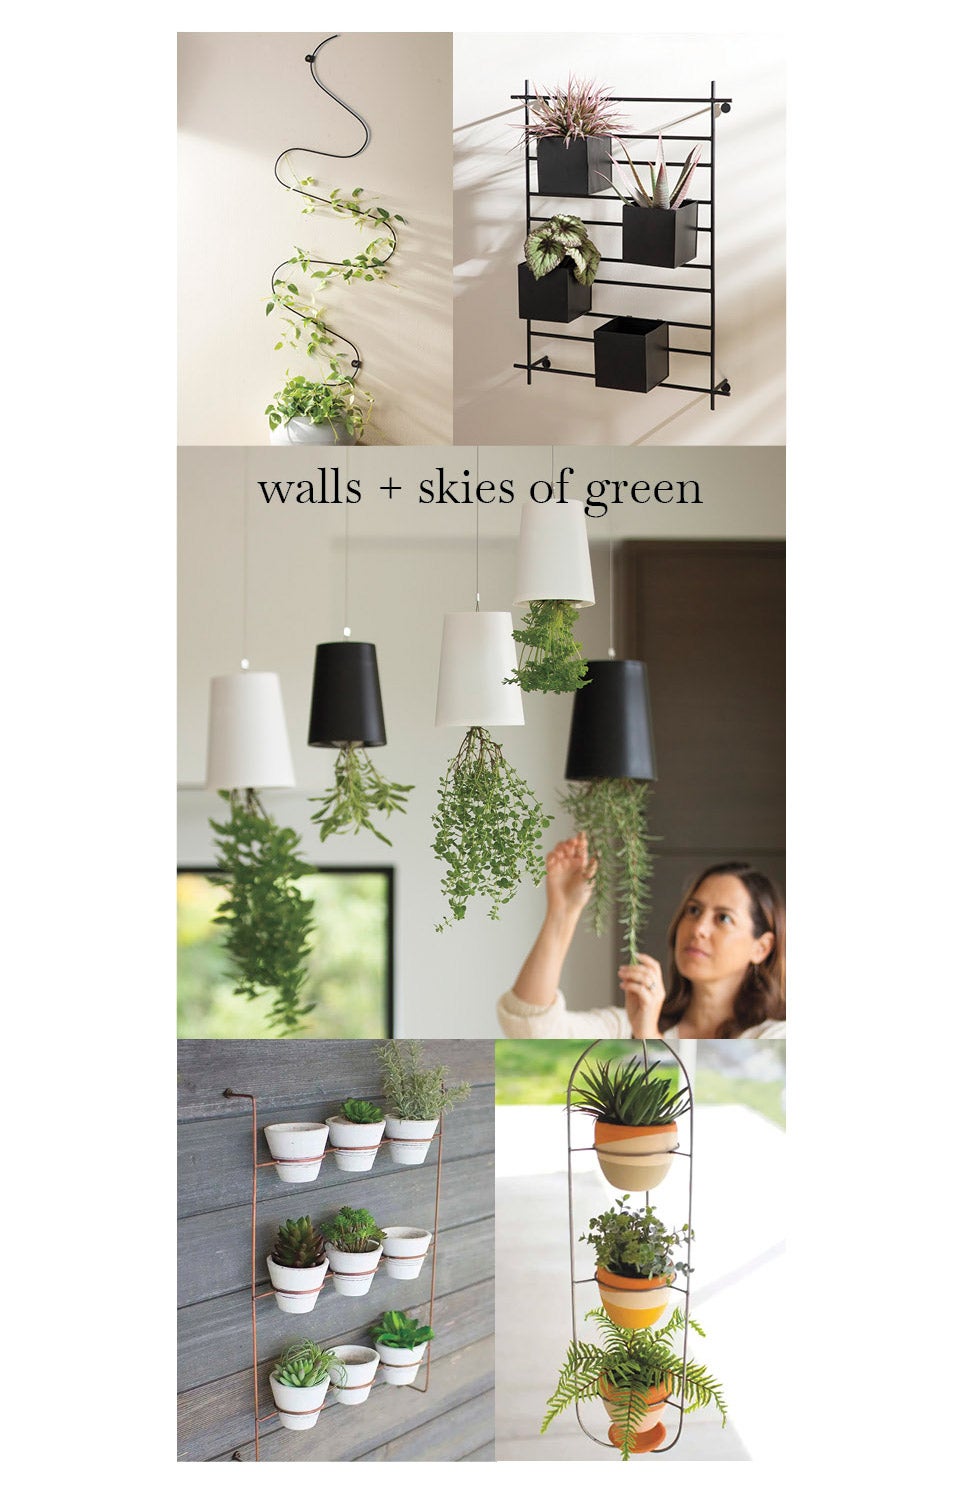 winding wall trellis and vertical wall planter with recycled sky planters. white wash clay pots on copper finish wall rack set of 9 and Hanging Metal Frame with 3-Tier Terracotta Planters.  wall + skies of green. image of